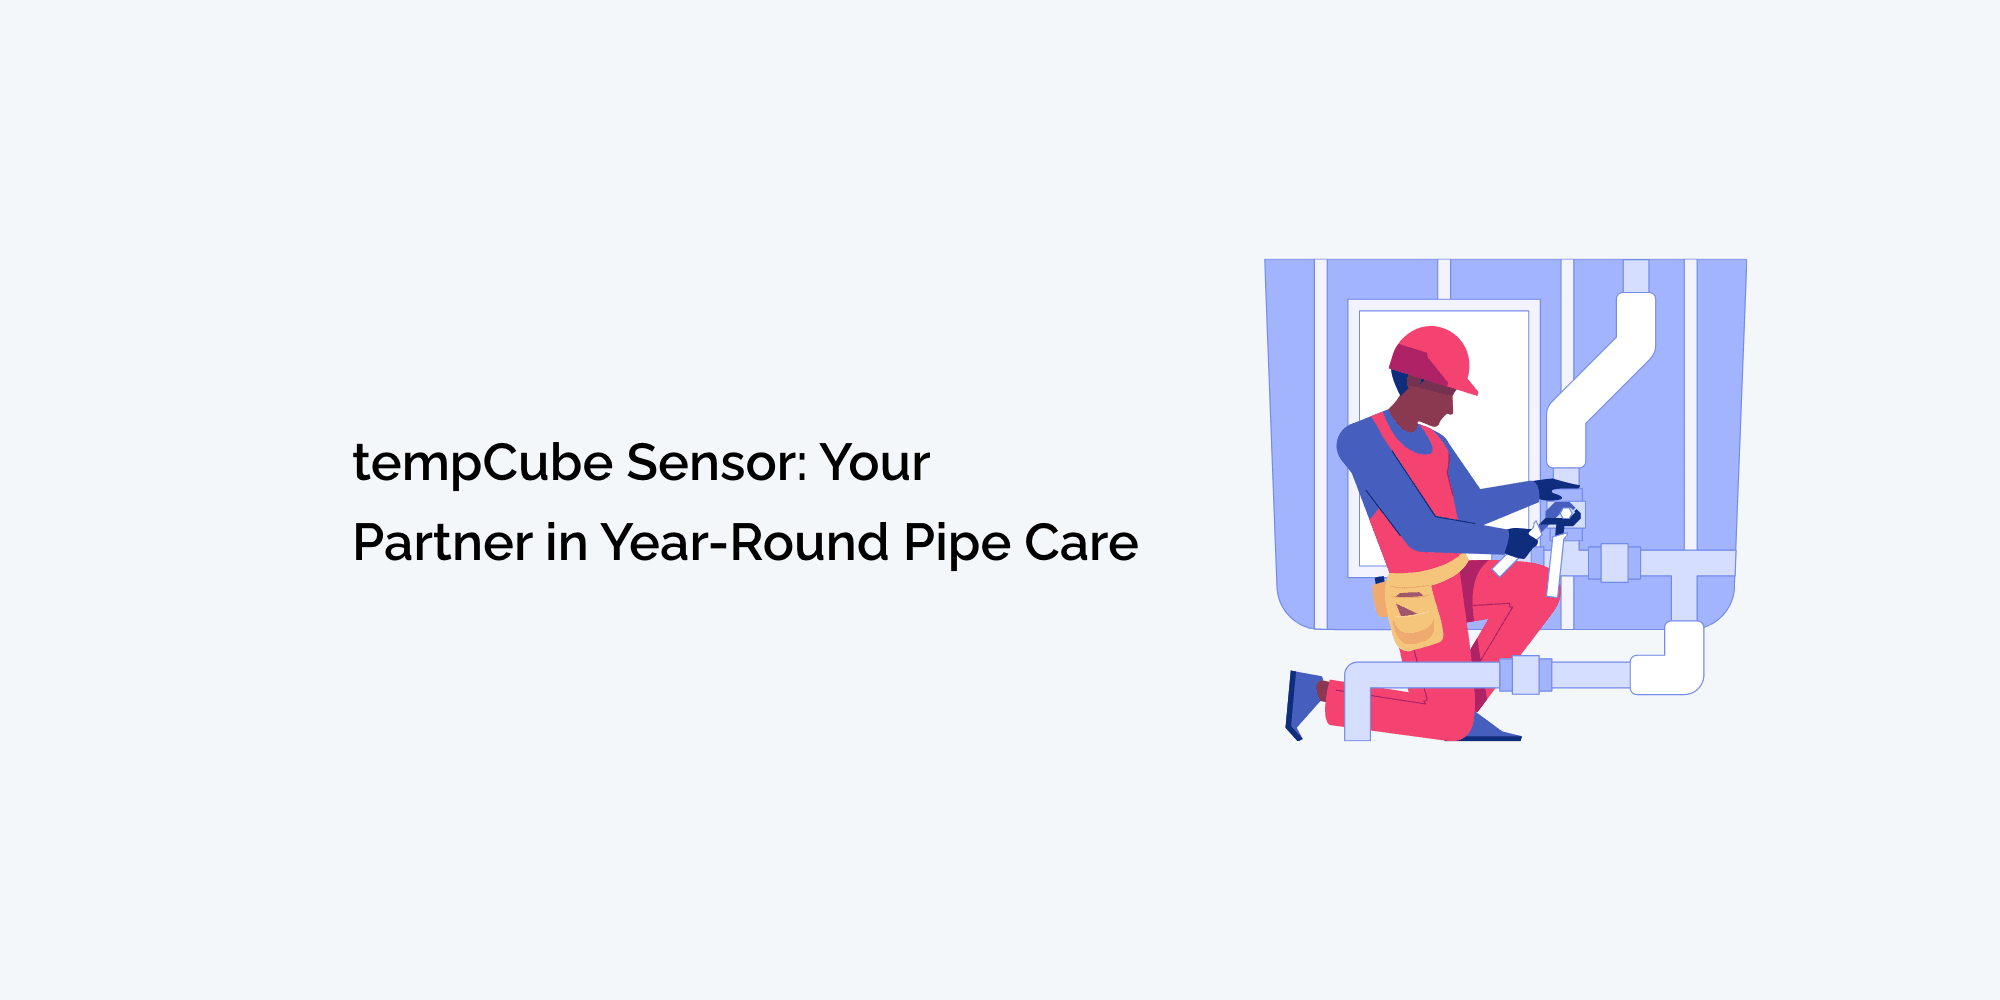 tempCube Sensor: Your Partner in Year-Round Pipe Care